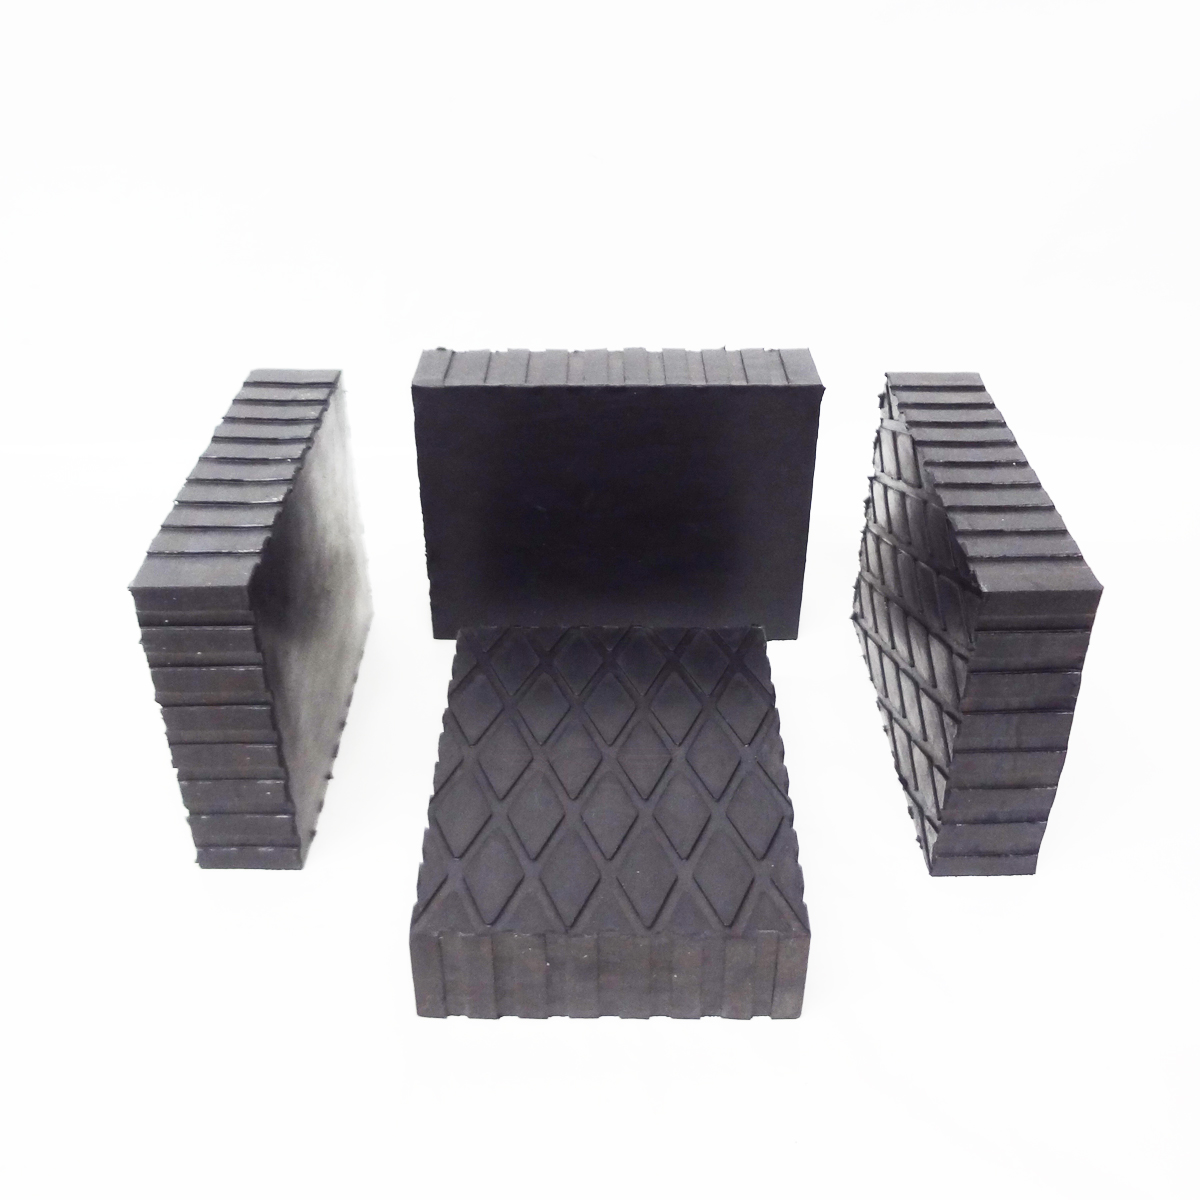 SET OF 4 Solid Rubber Lift Block Pad 6" x 4 3/4" x 3" RUBBER SPACER made ITALY 